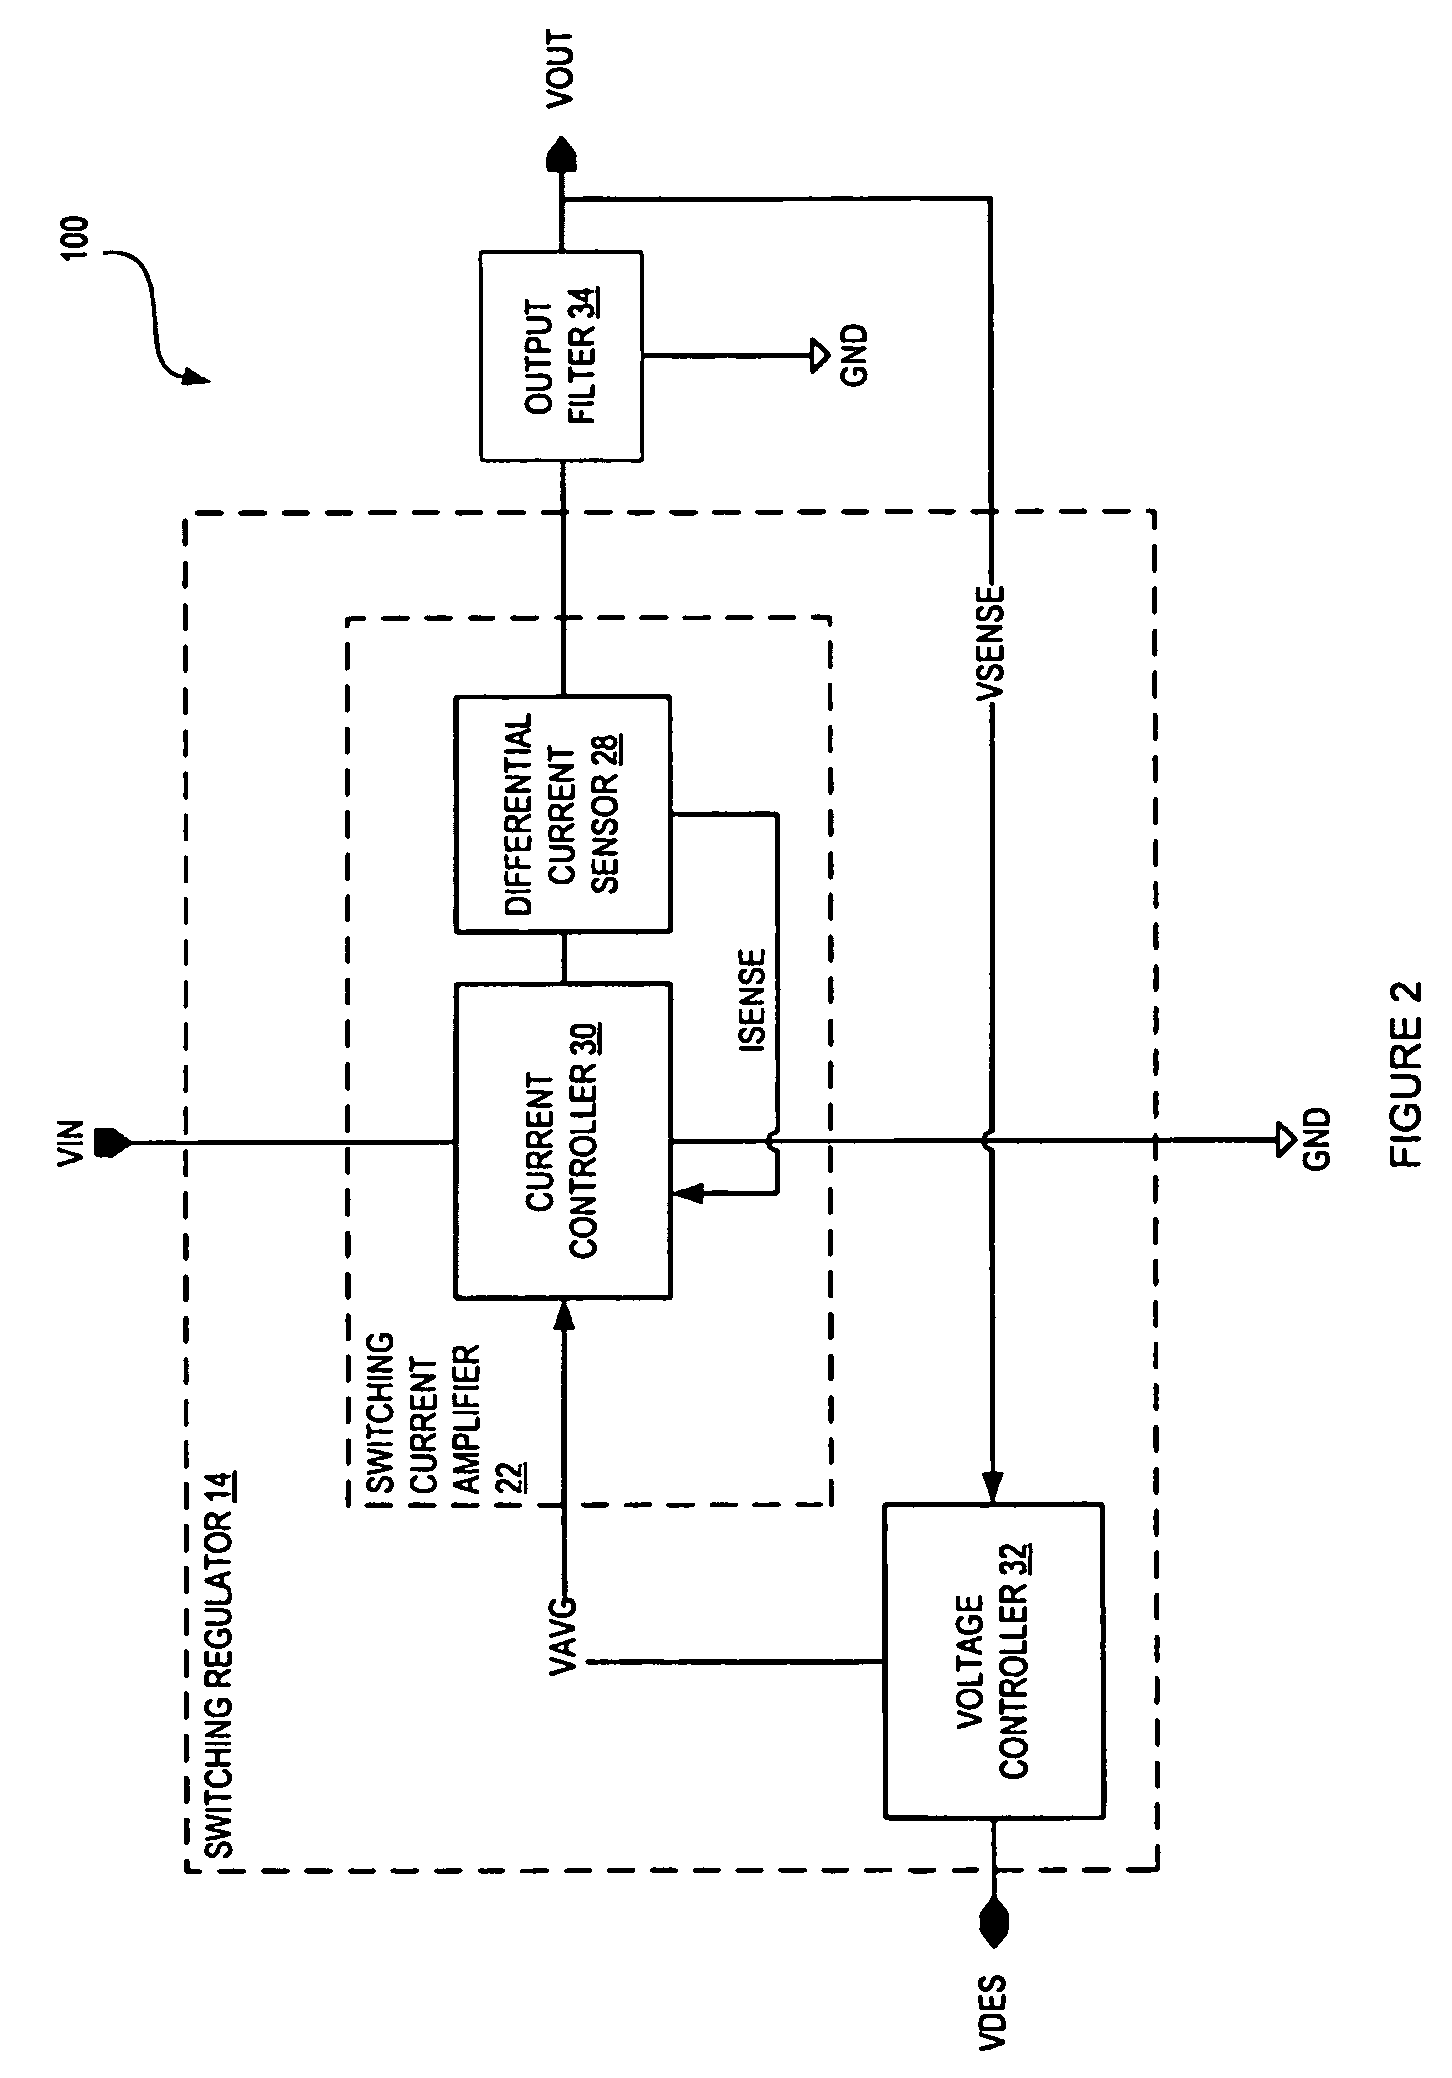 Switching regulator with average current mode control